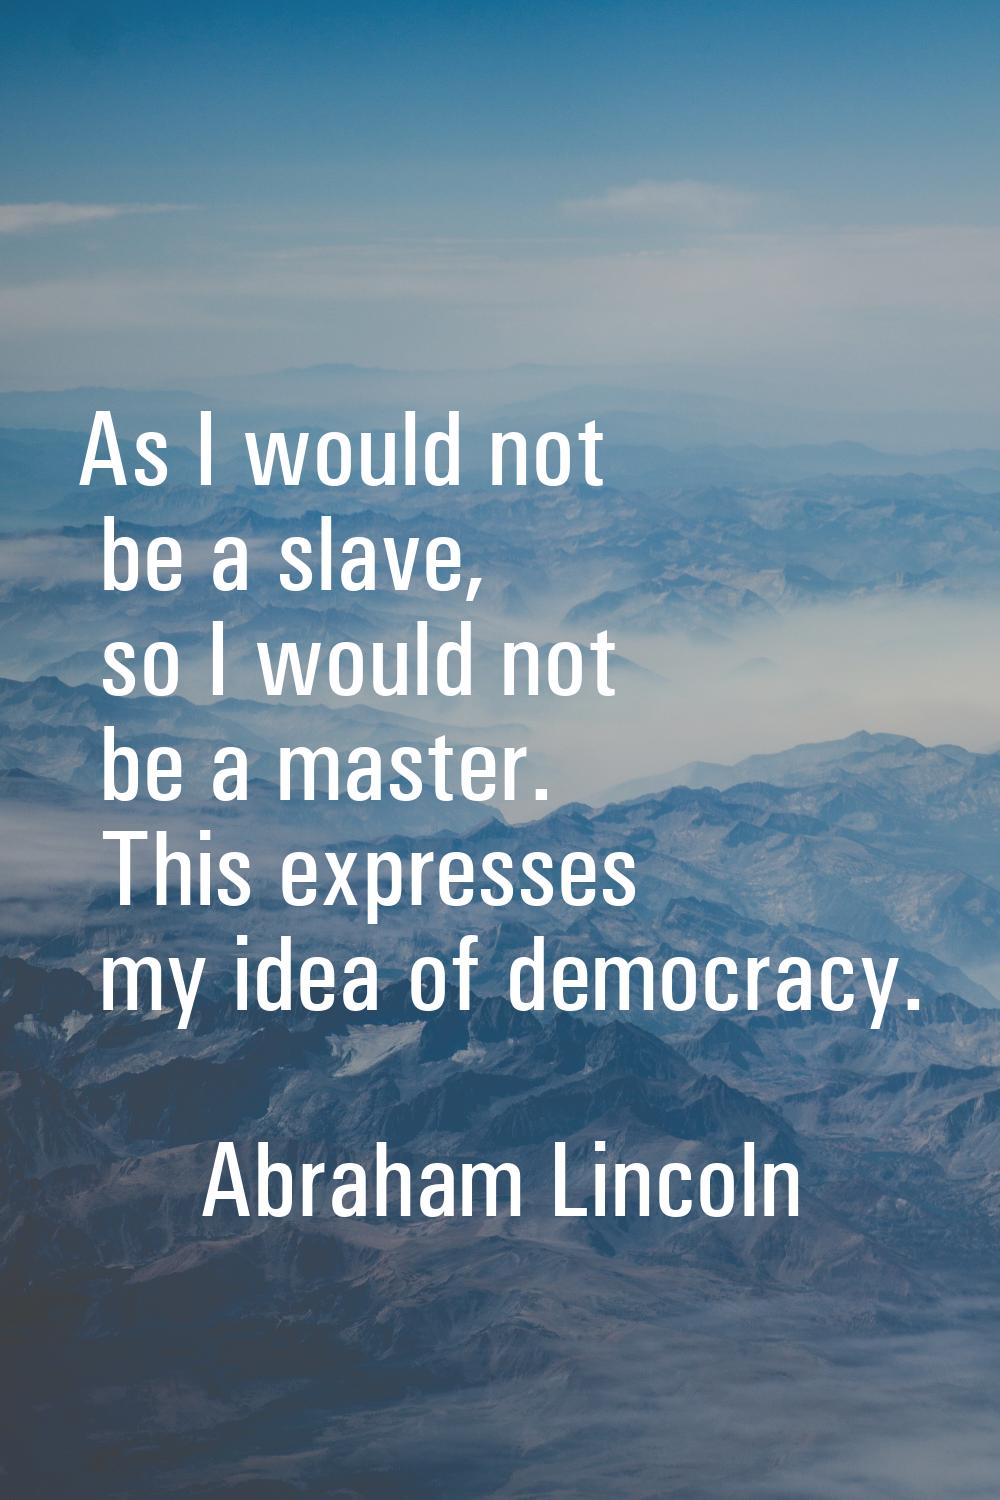 As I would not be a slave, so I would not be a master. This expresses my idea of democracy.